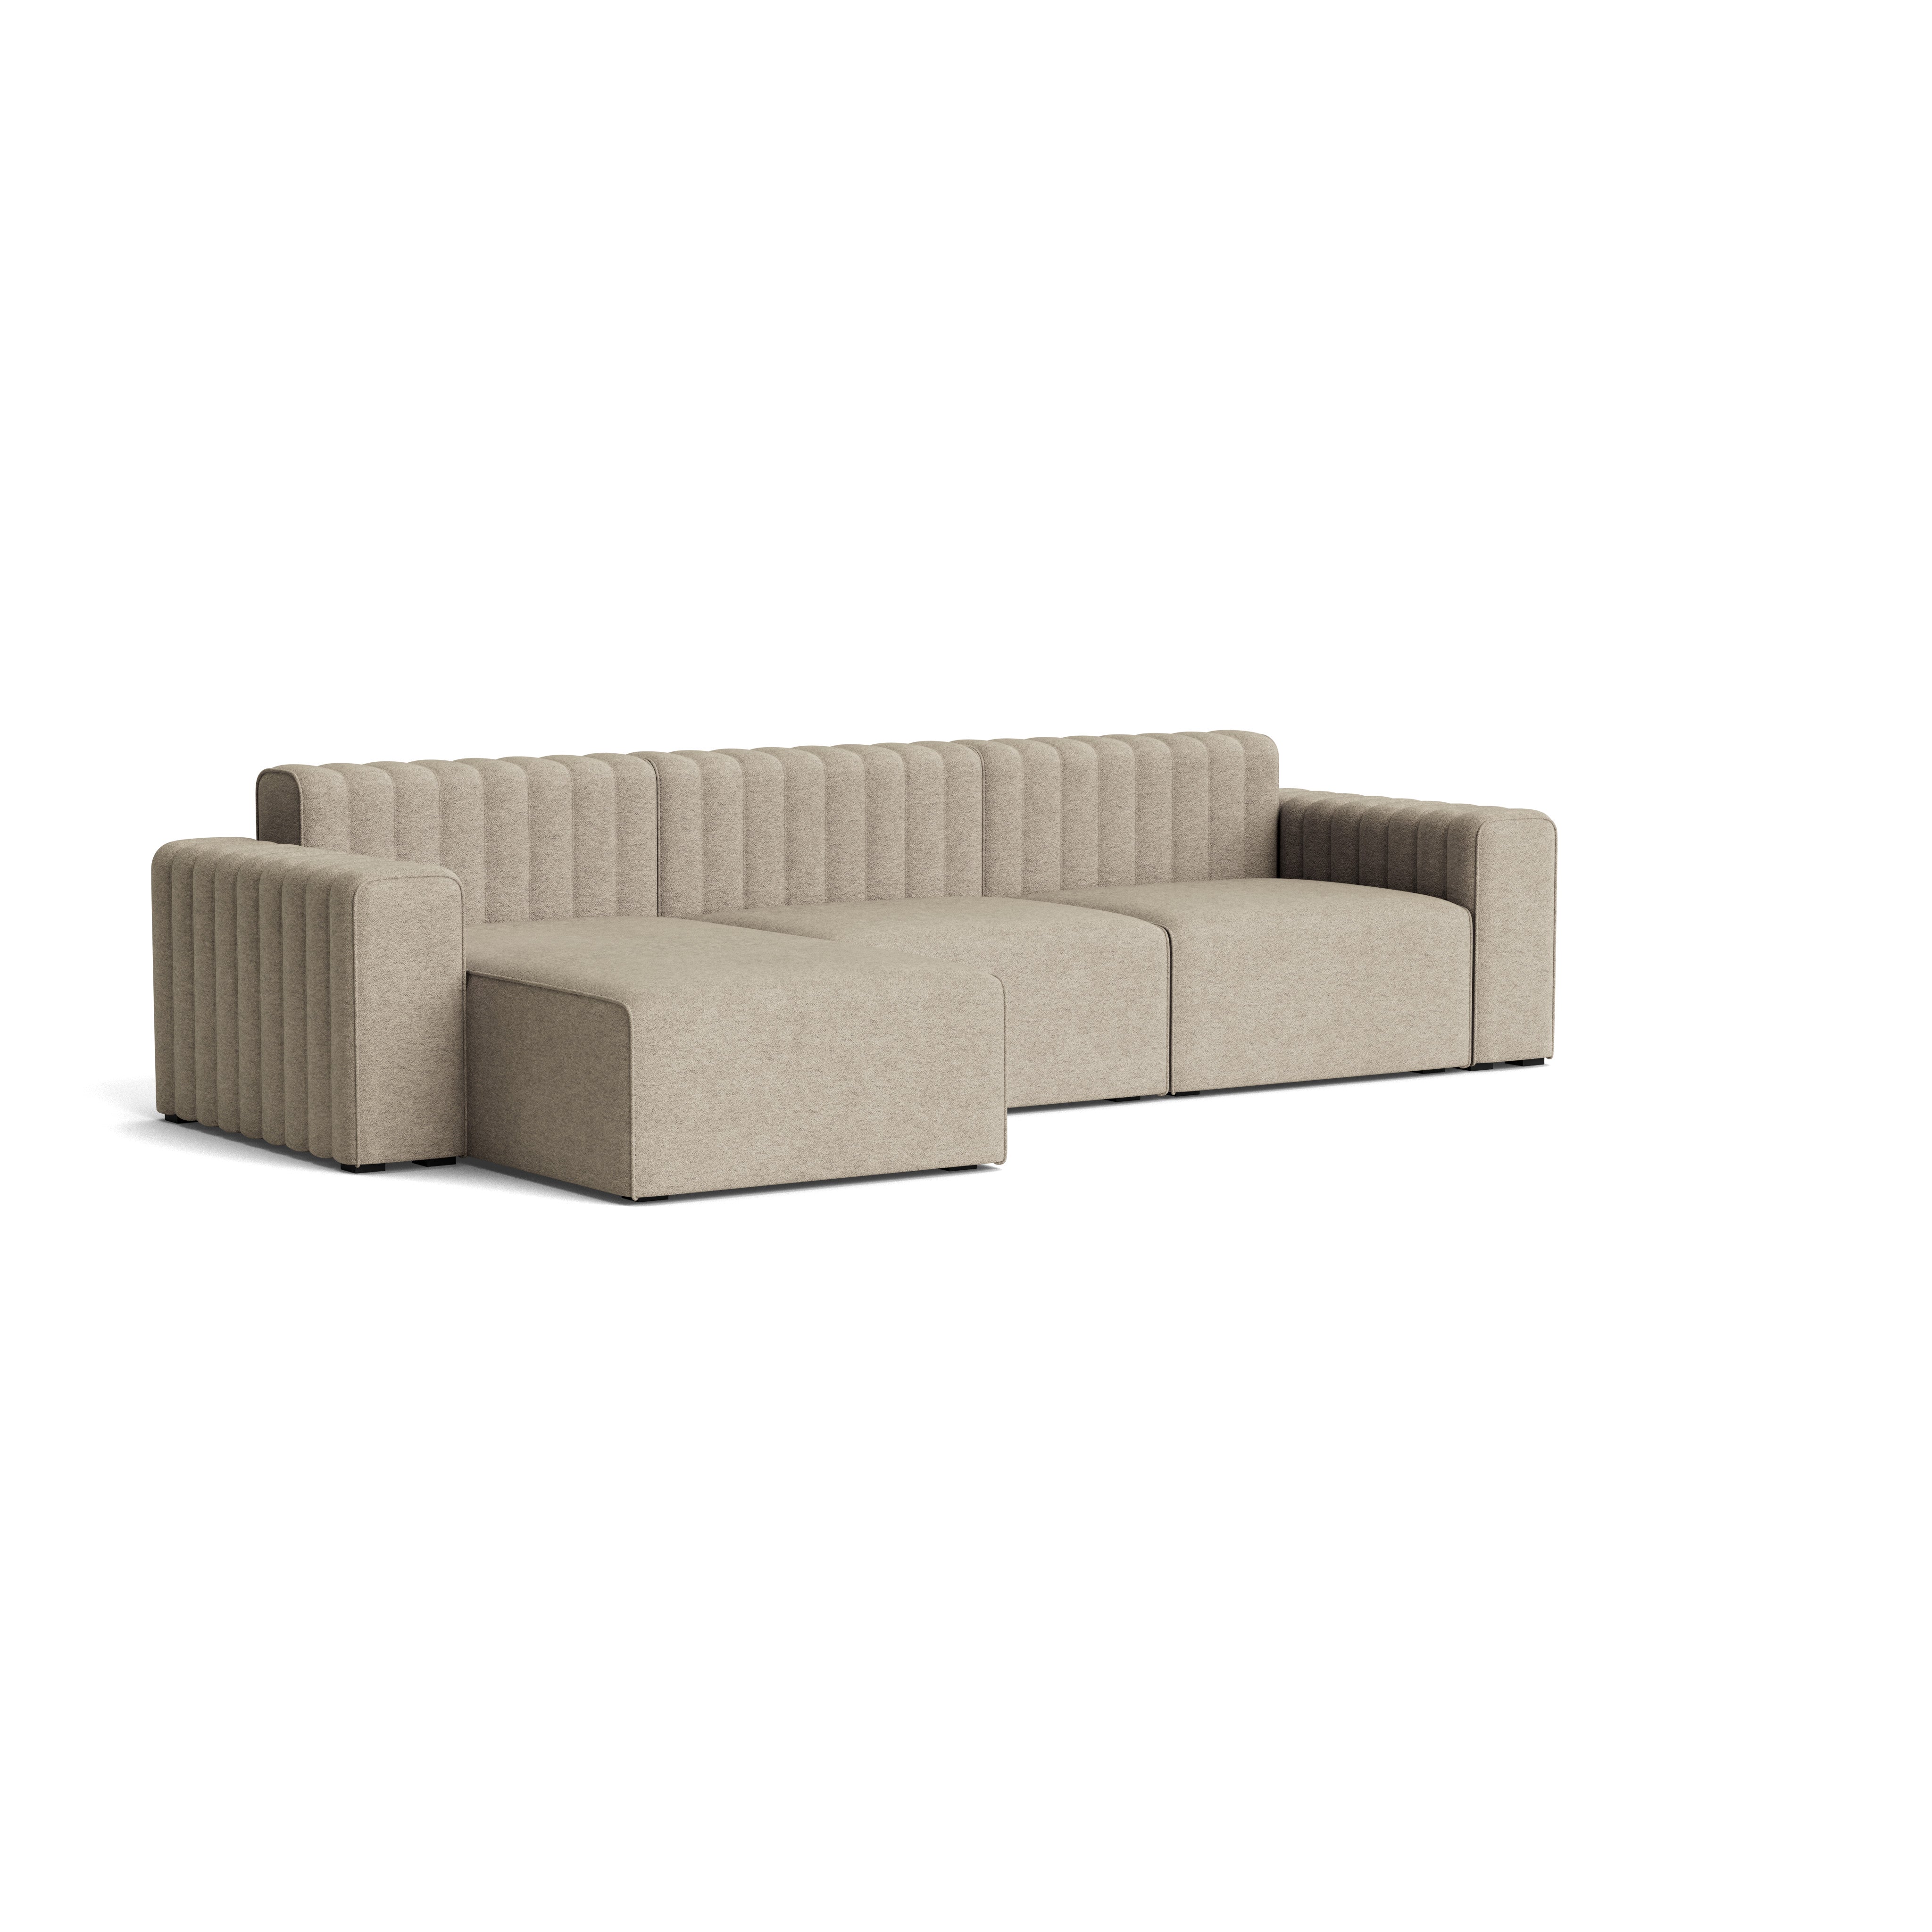 NORR11 RIFF Sofa - 3 Seater w/ Chaise Longue Right